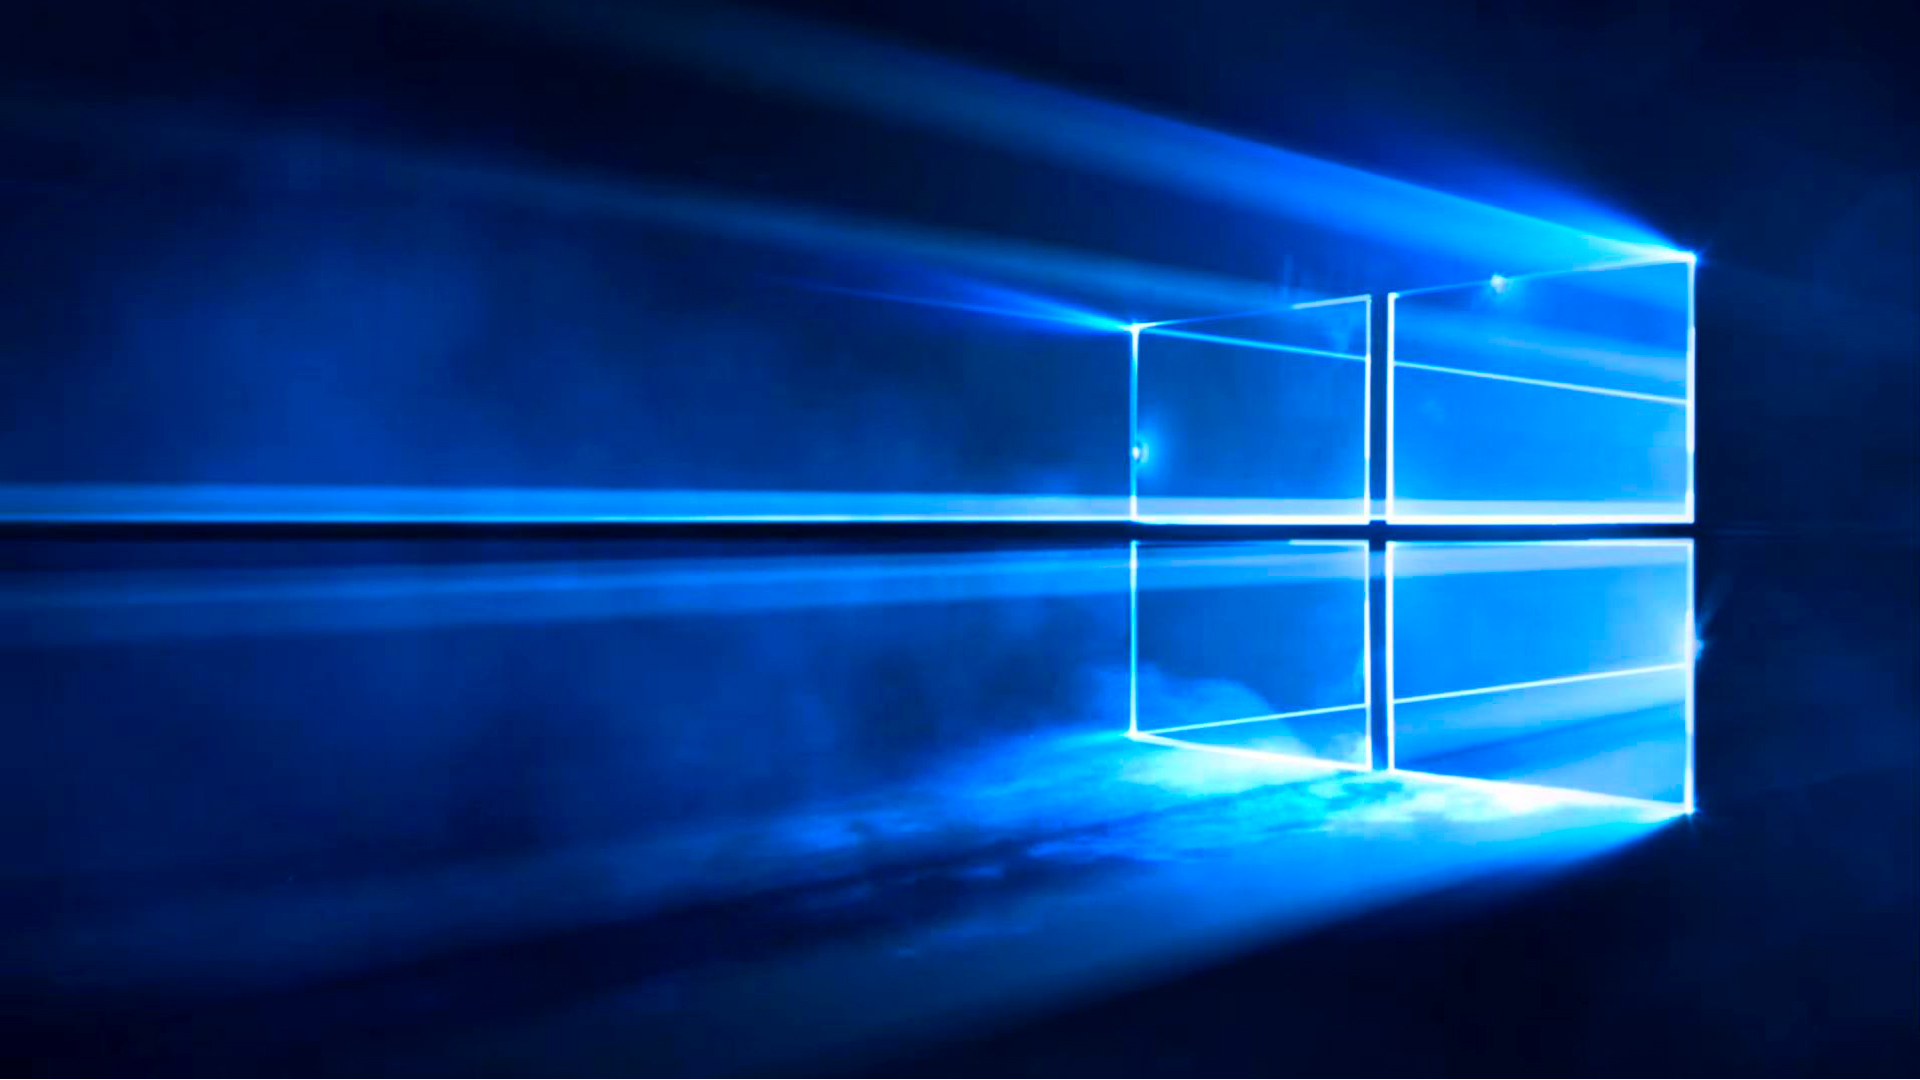 The New Windows Default Wallpaper And Lock Screen Image Is One Of